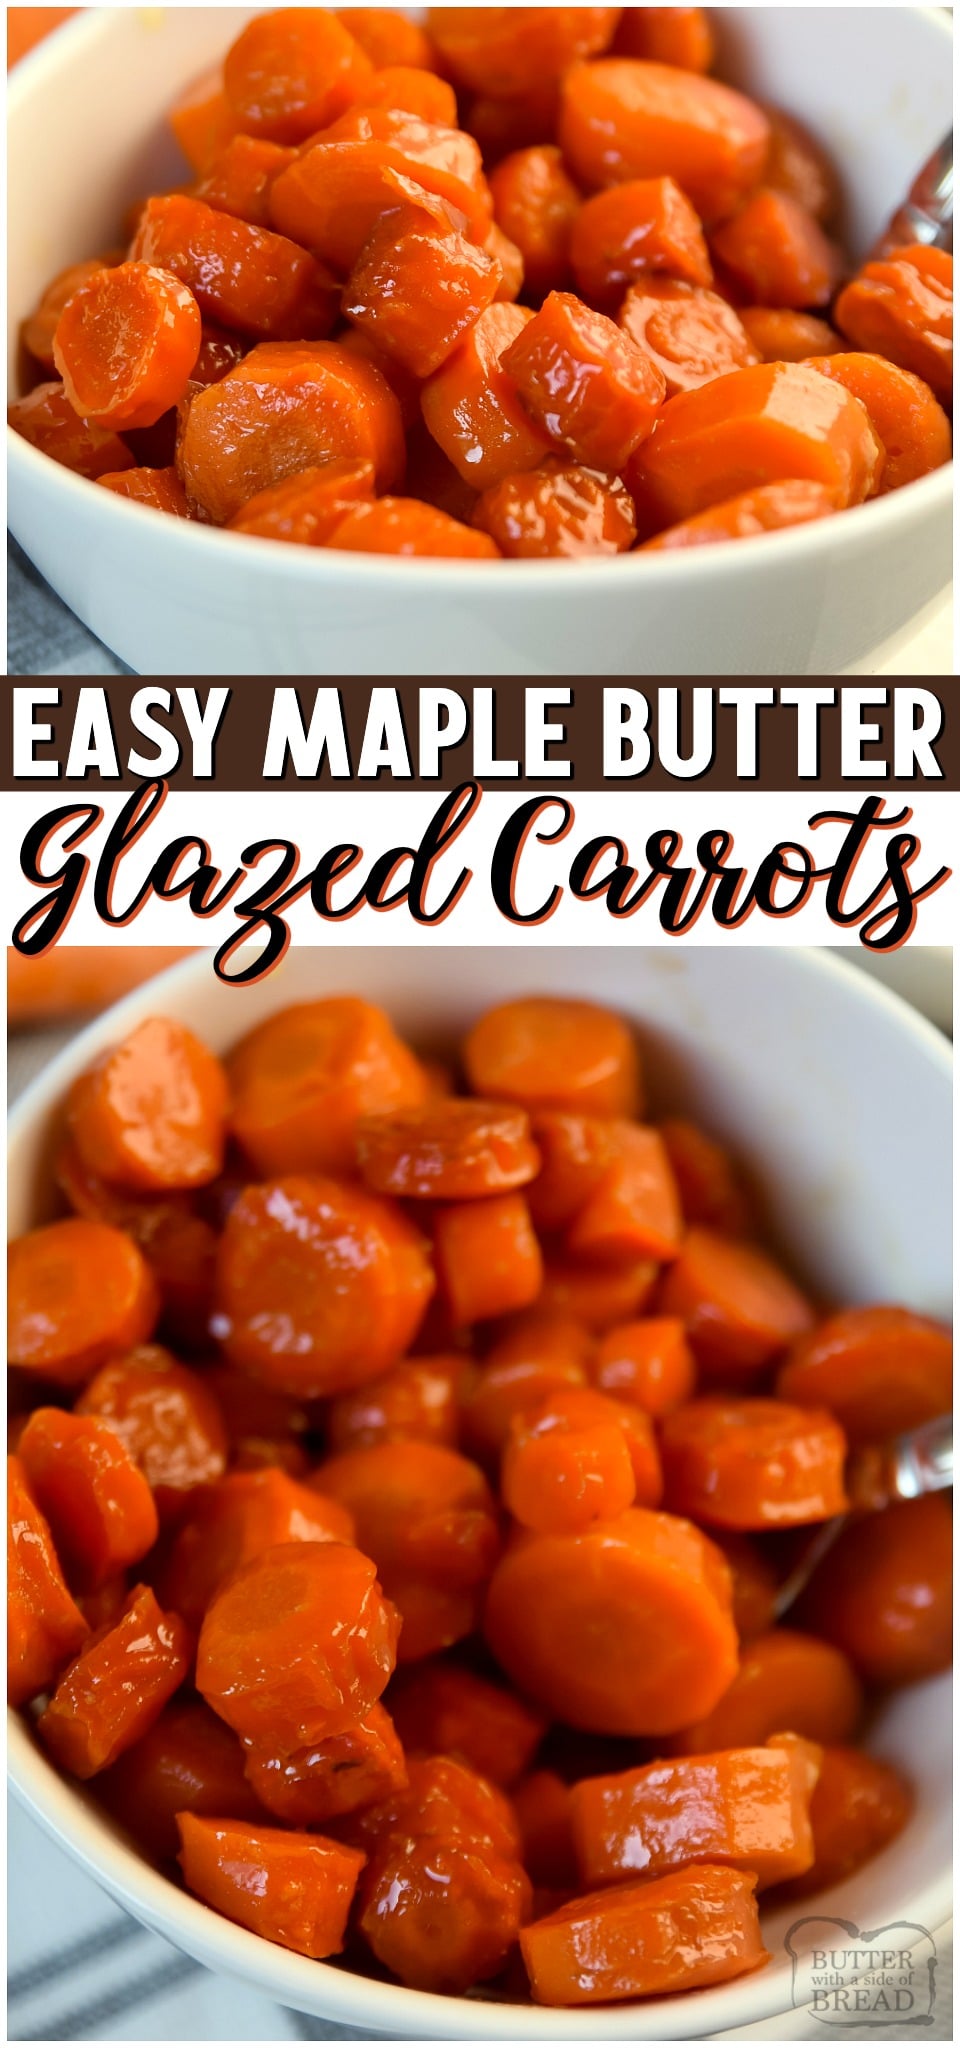 Maple Glazed Carrots~ tender, sweet & the perfect easy vegetable side dish. Glazed Carrots simmered in a sauce of maple syrup and butter & are so simple to make! #carrots #vegetables #sidedish #maple #butter #glazed #recipe from BUTTER WITH A SIDE OF BREAD